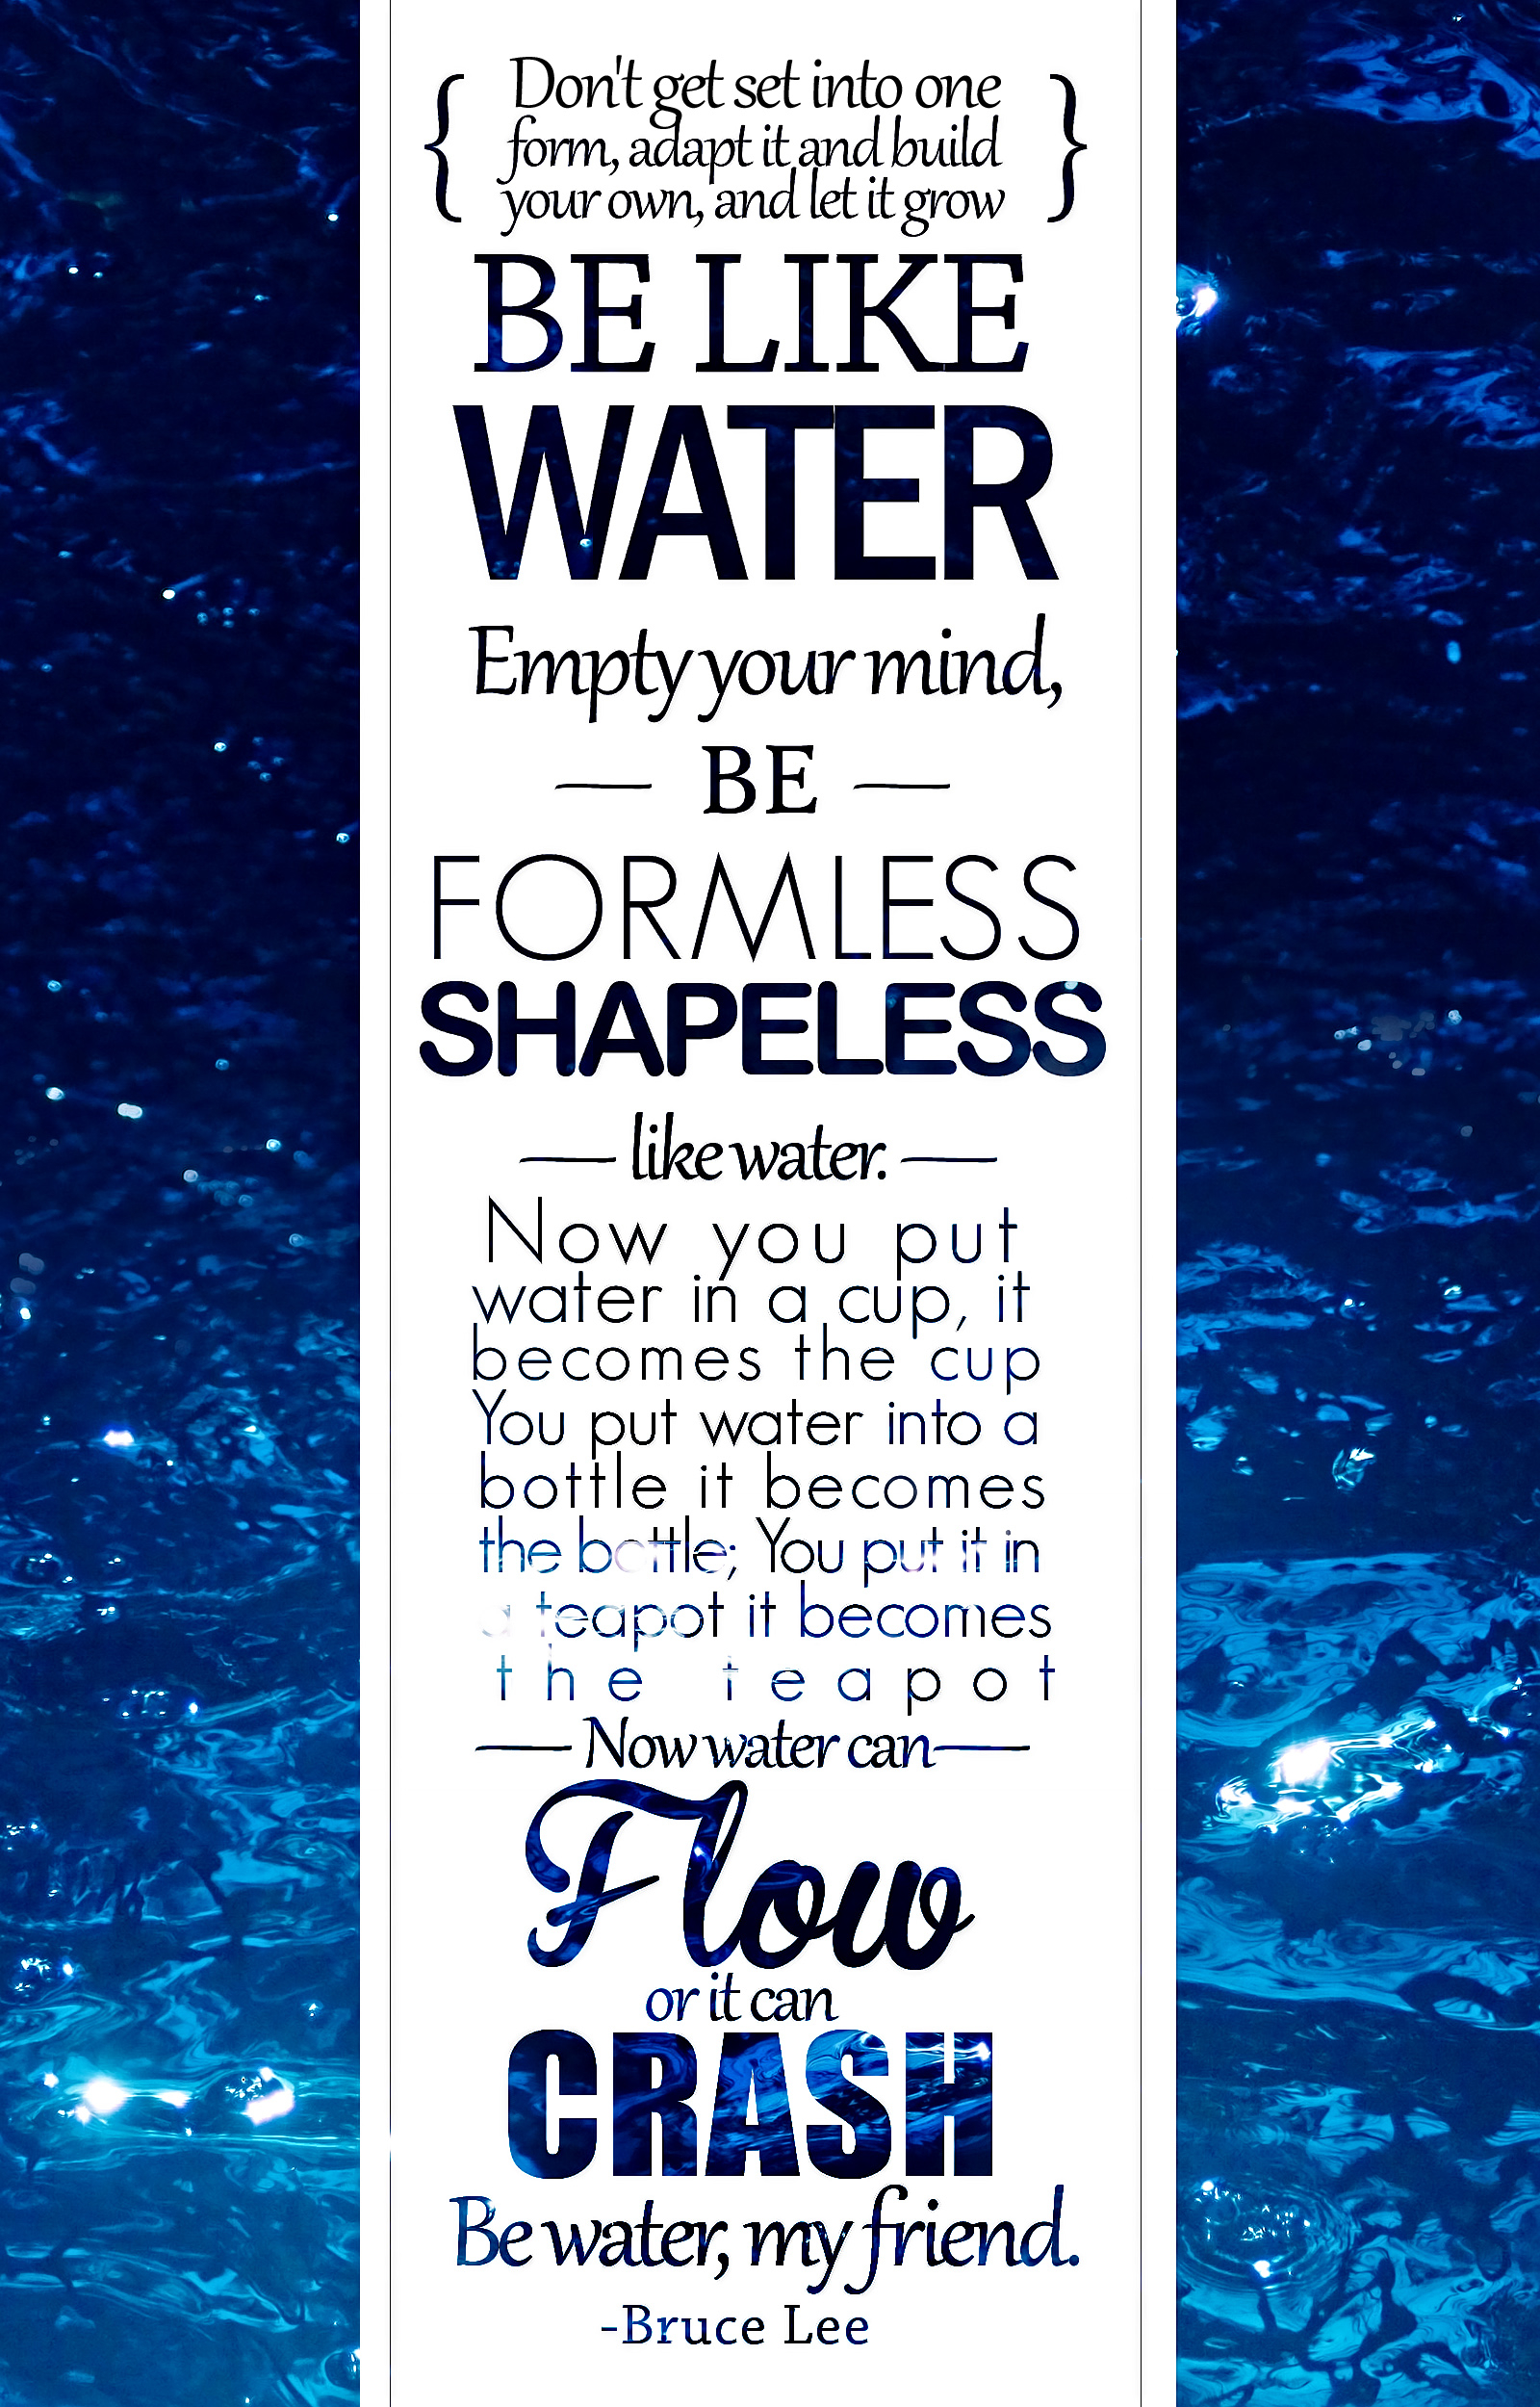 Famous Bruce Lee Quotes Water. QuotesGram